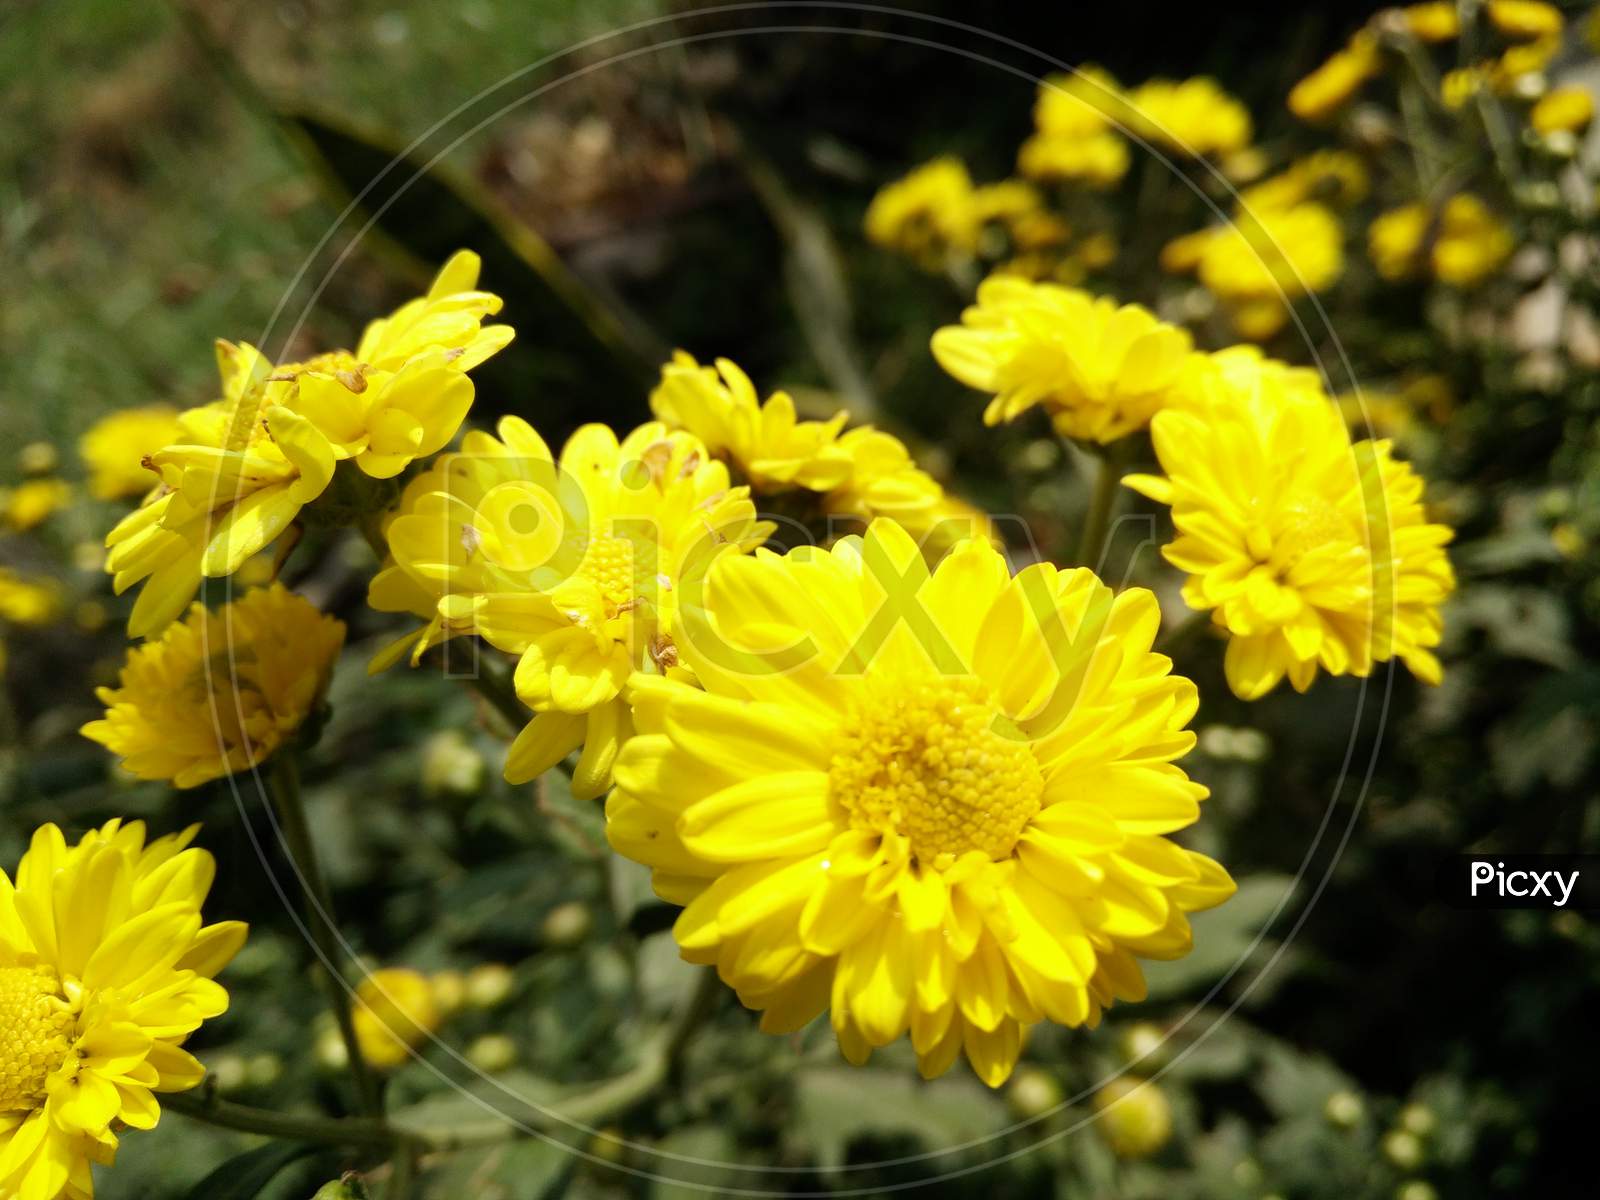 Yellow Chrysanth Flowers Blooming On Plants At a Garden